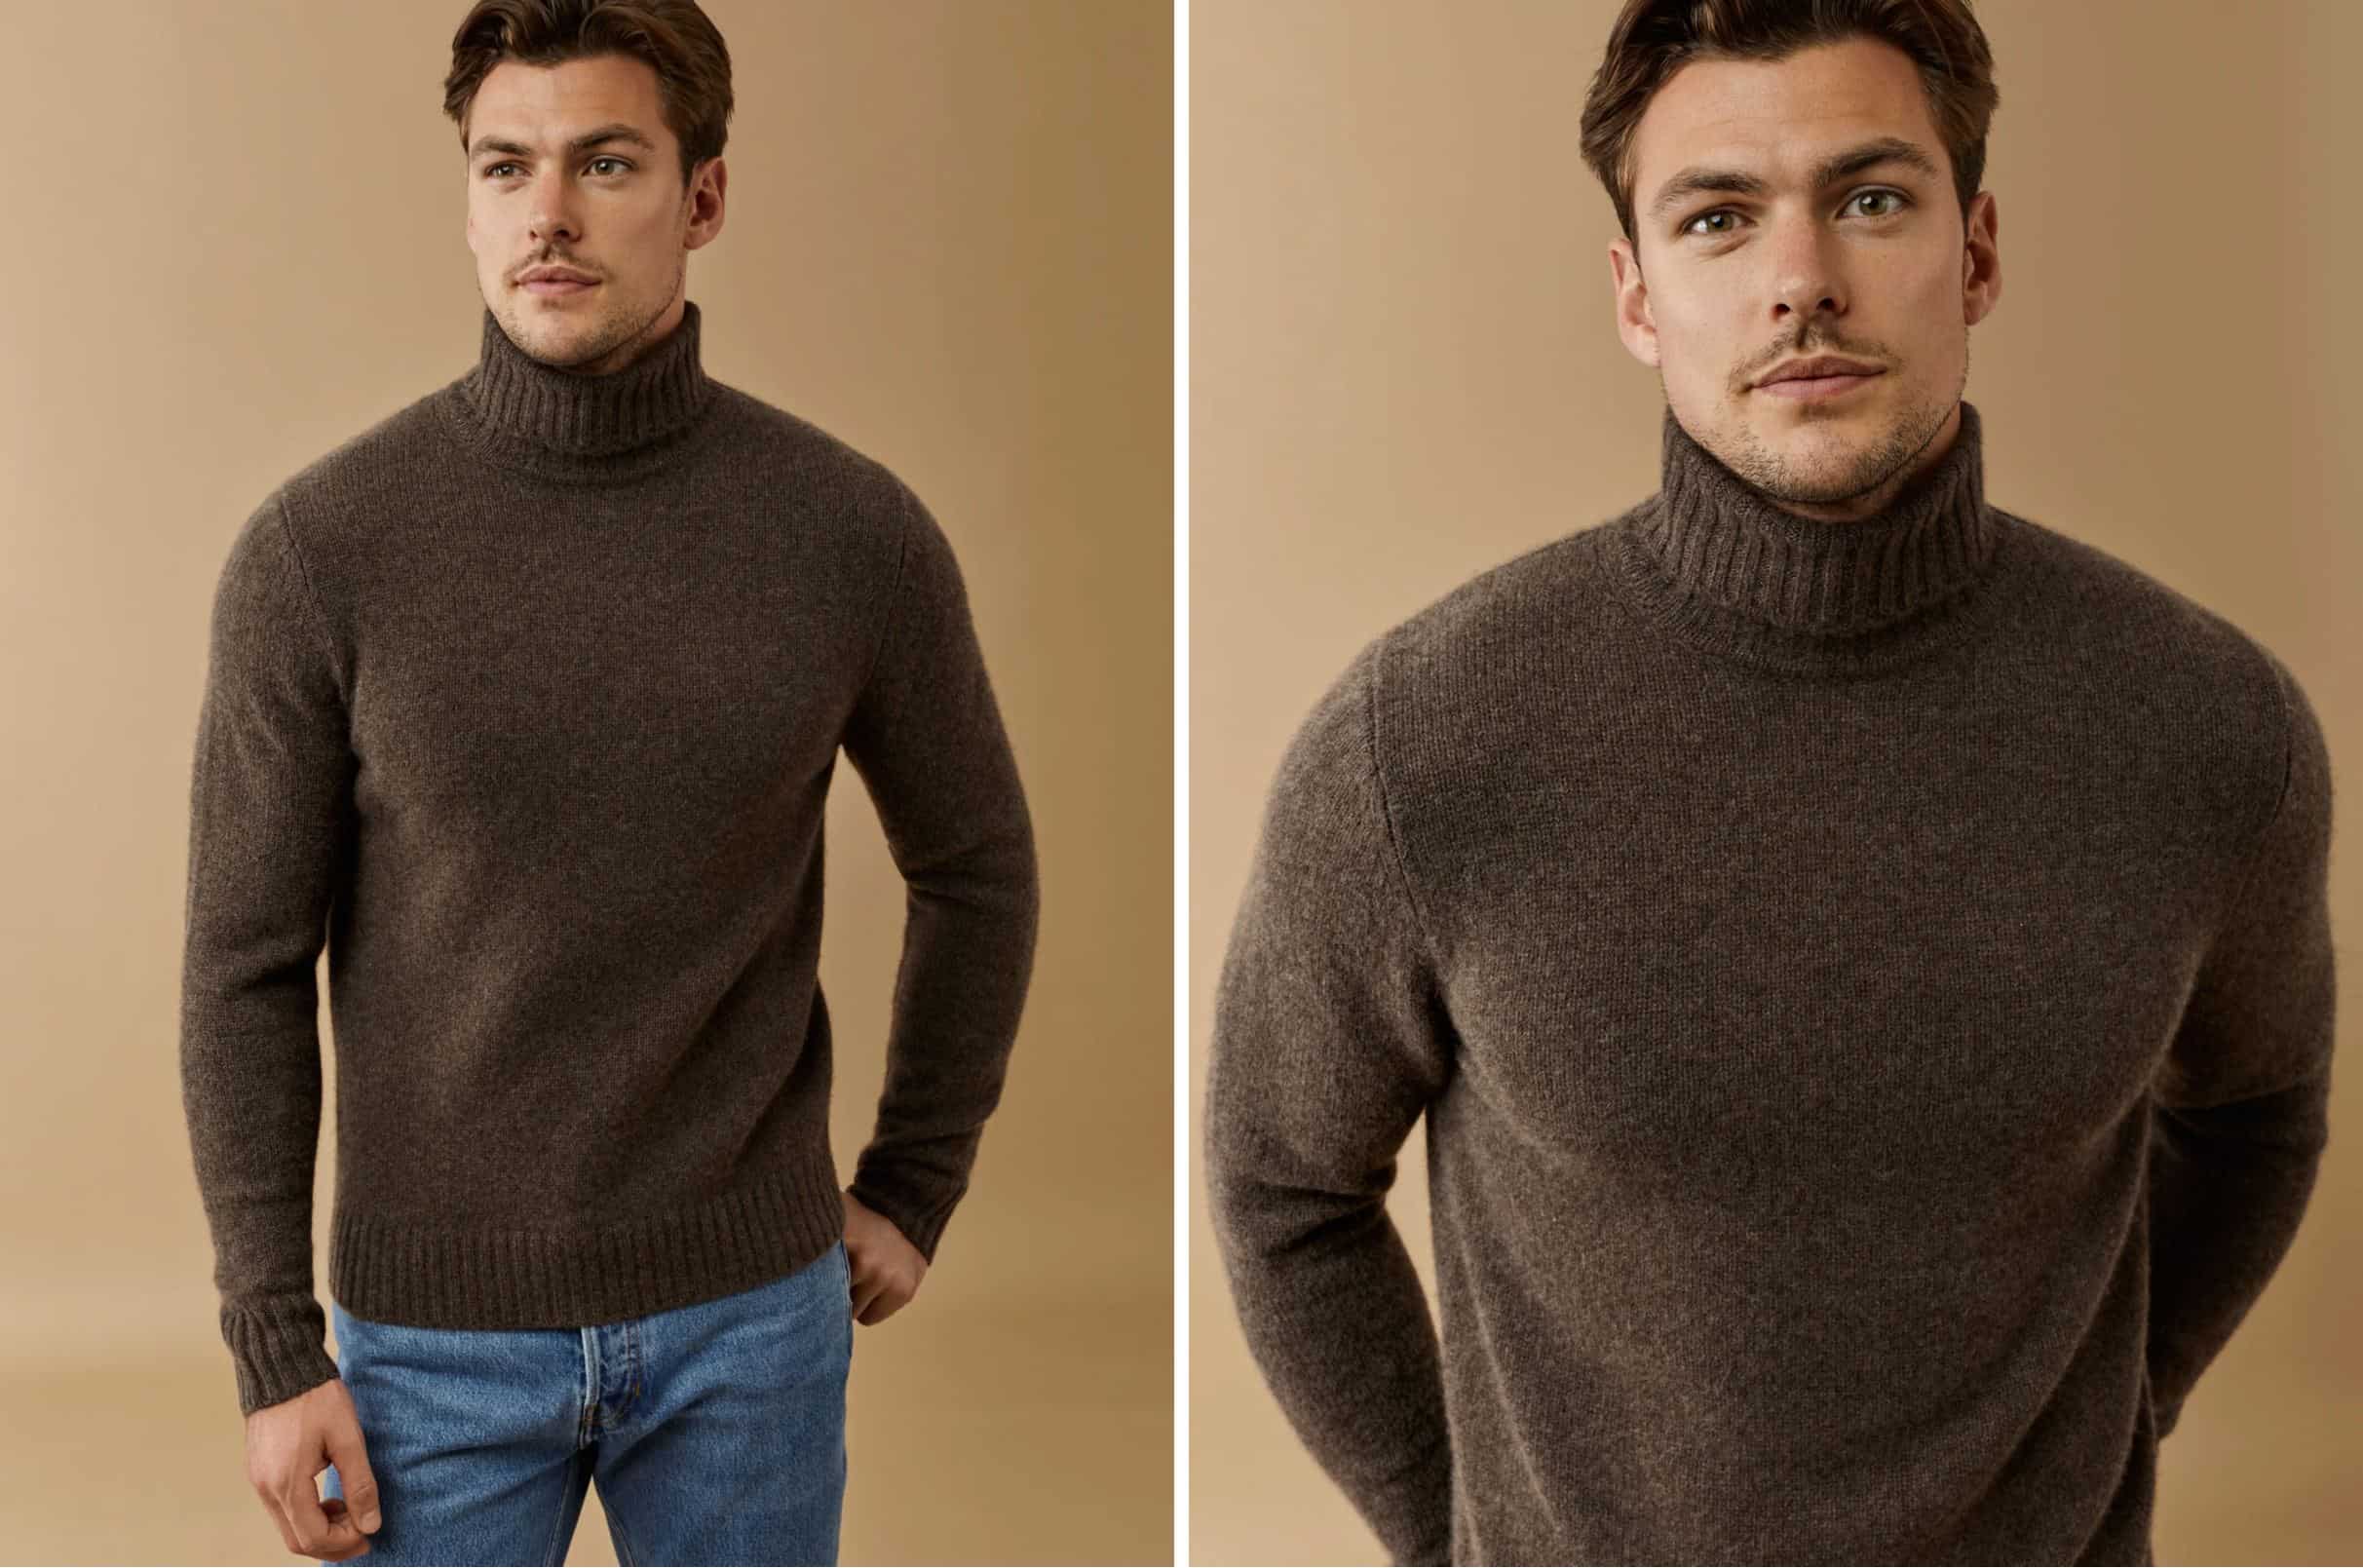 5 Best Cashmere Sweaters For Men 2021 For All Budgets